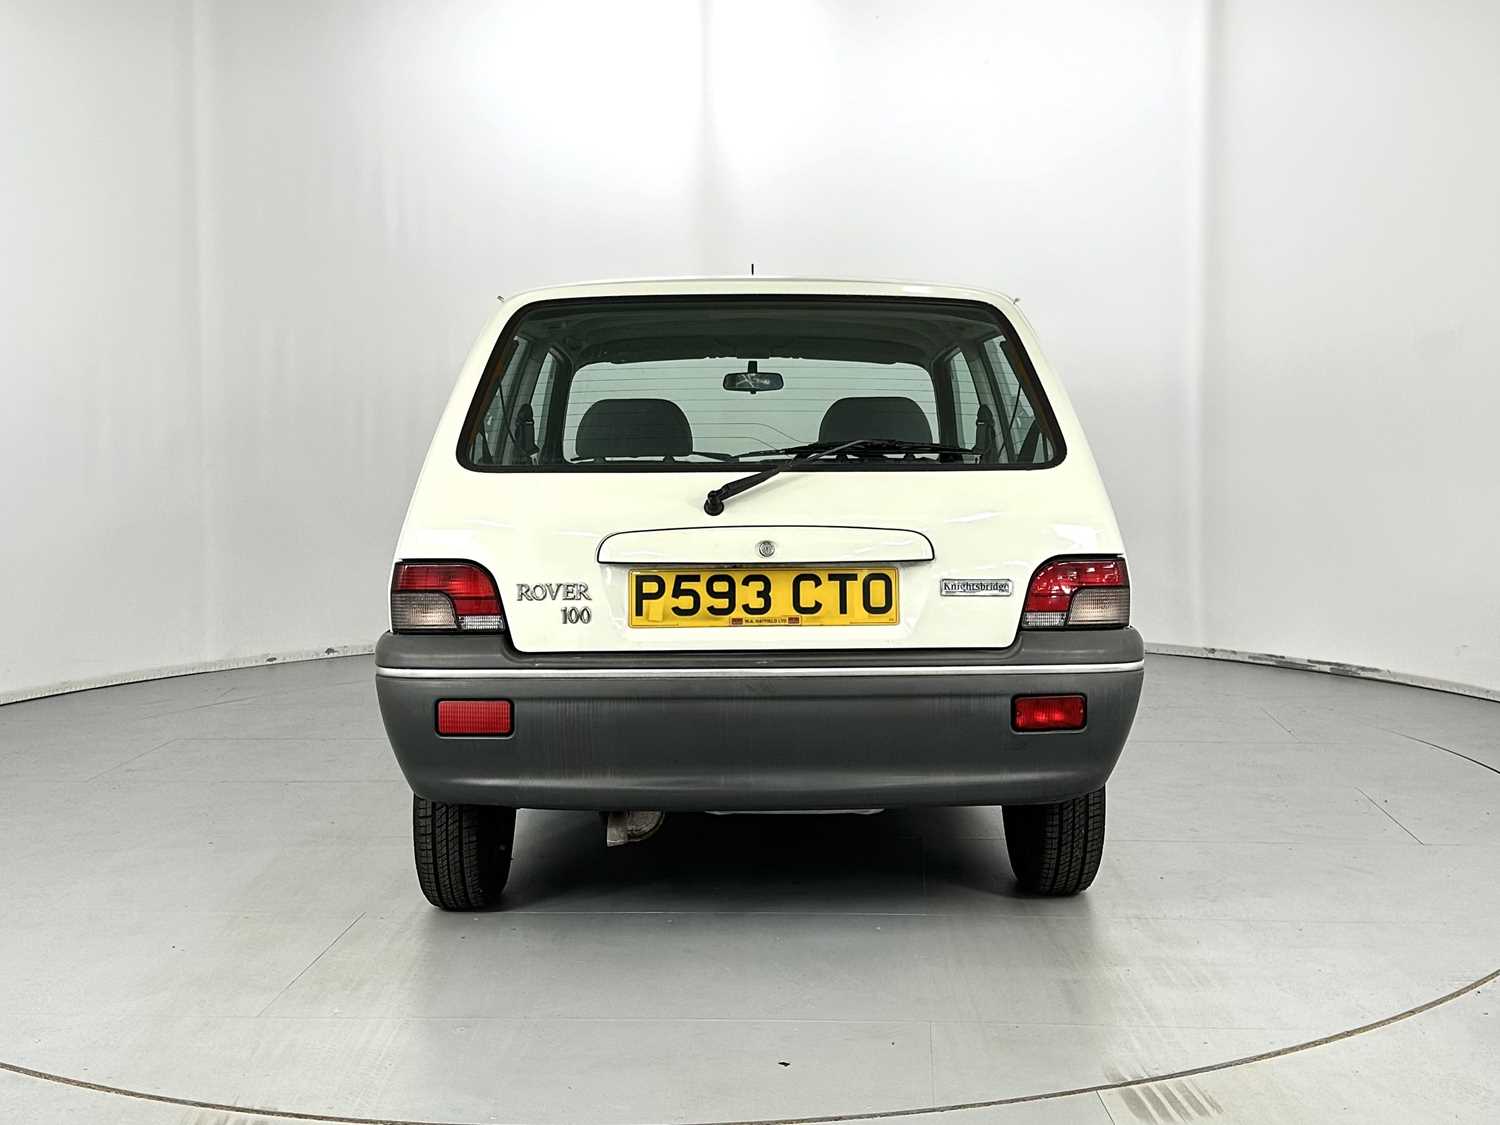 1996 Rover Metro - NO RESERVE 13,000 miles! - Image 8 of 29